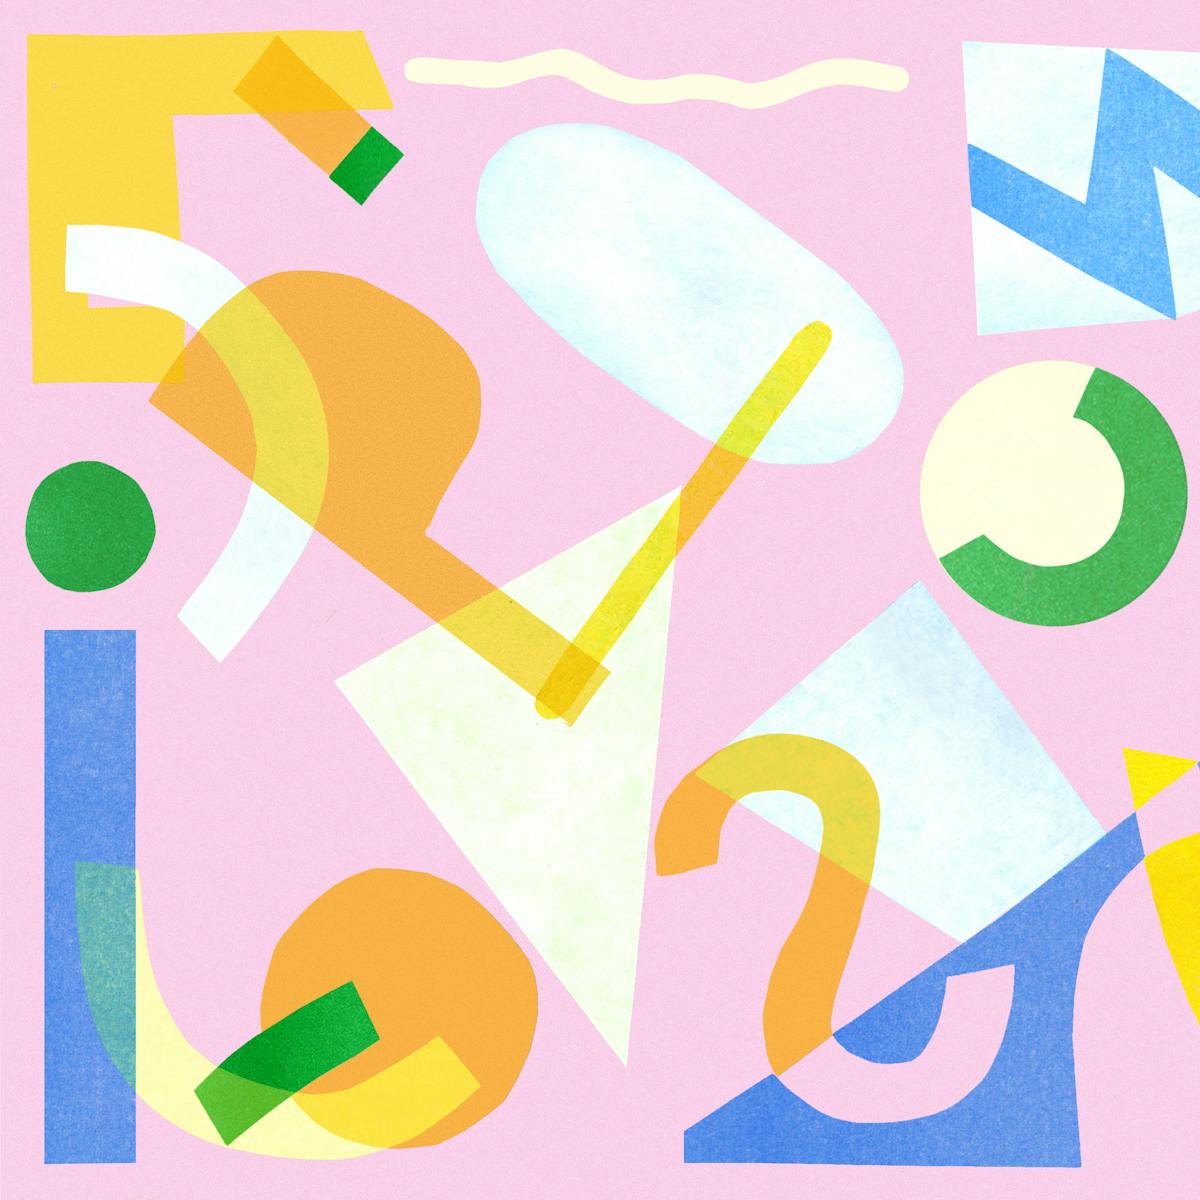 Abstract colourful artwork. The artwork has a light pink background with lots of abstract letters and numbers scattered across it. There are several rectangles, circles and triangles across the background as well. The shapes and letters are in a variety of bright colours: yellow, orange, blue and green. 